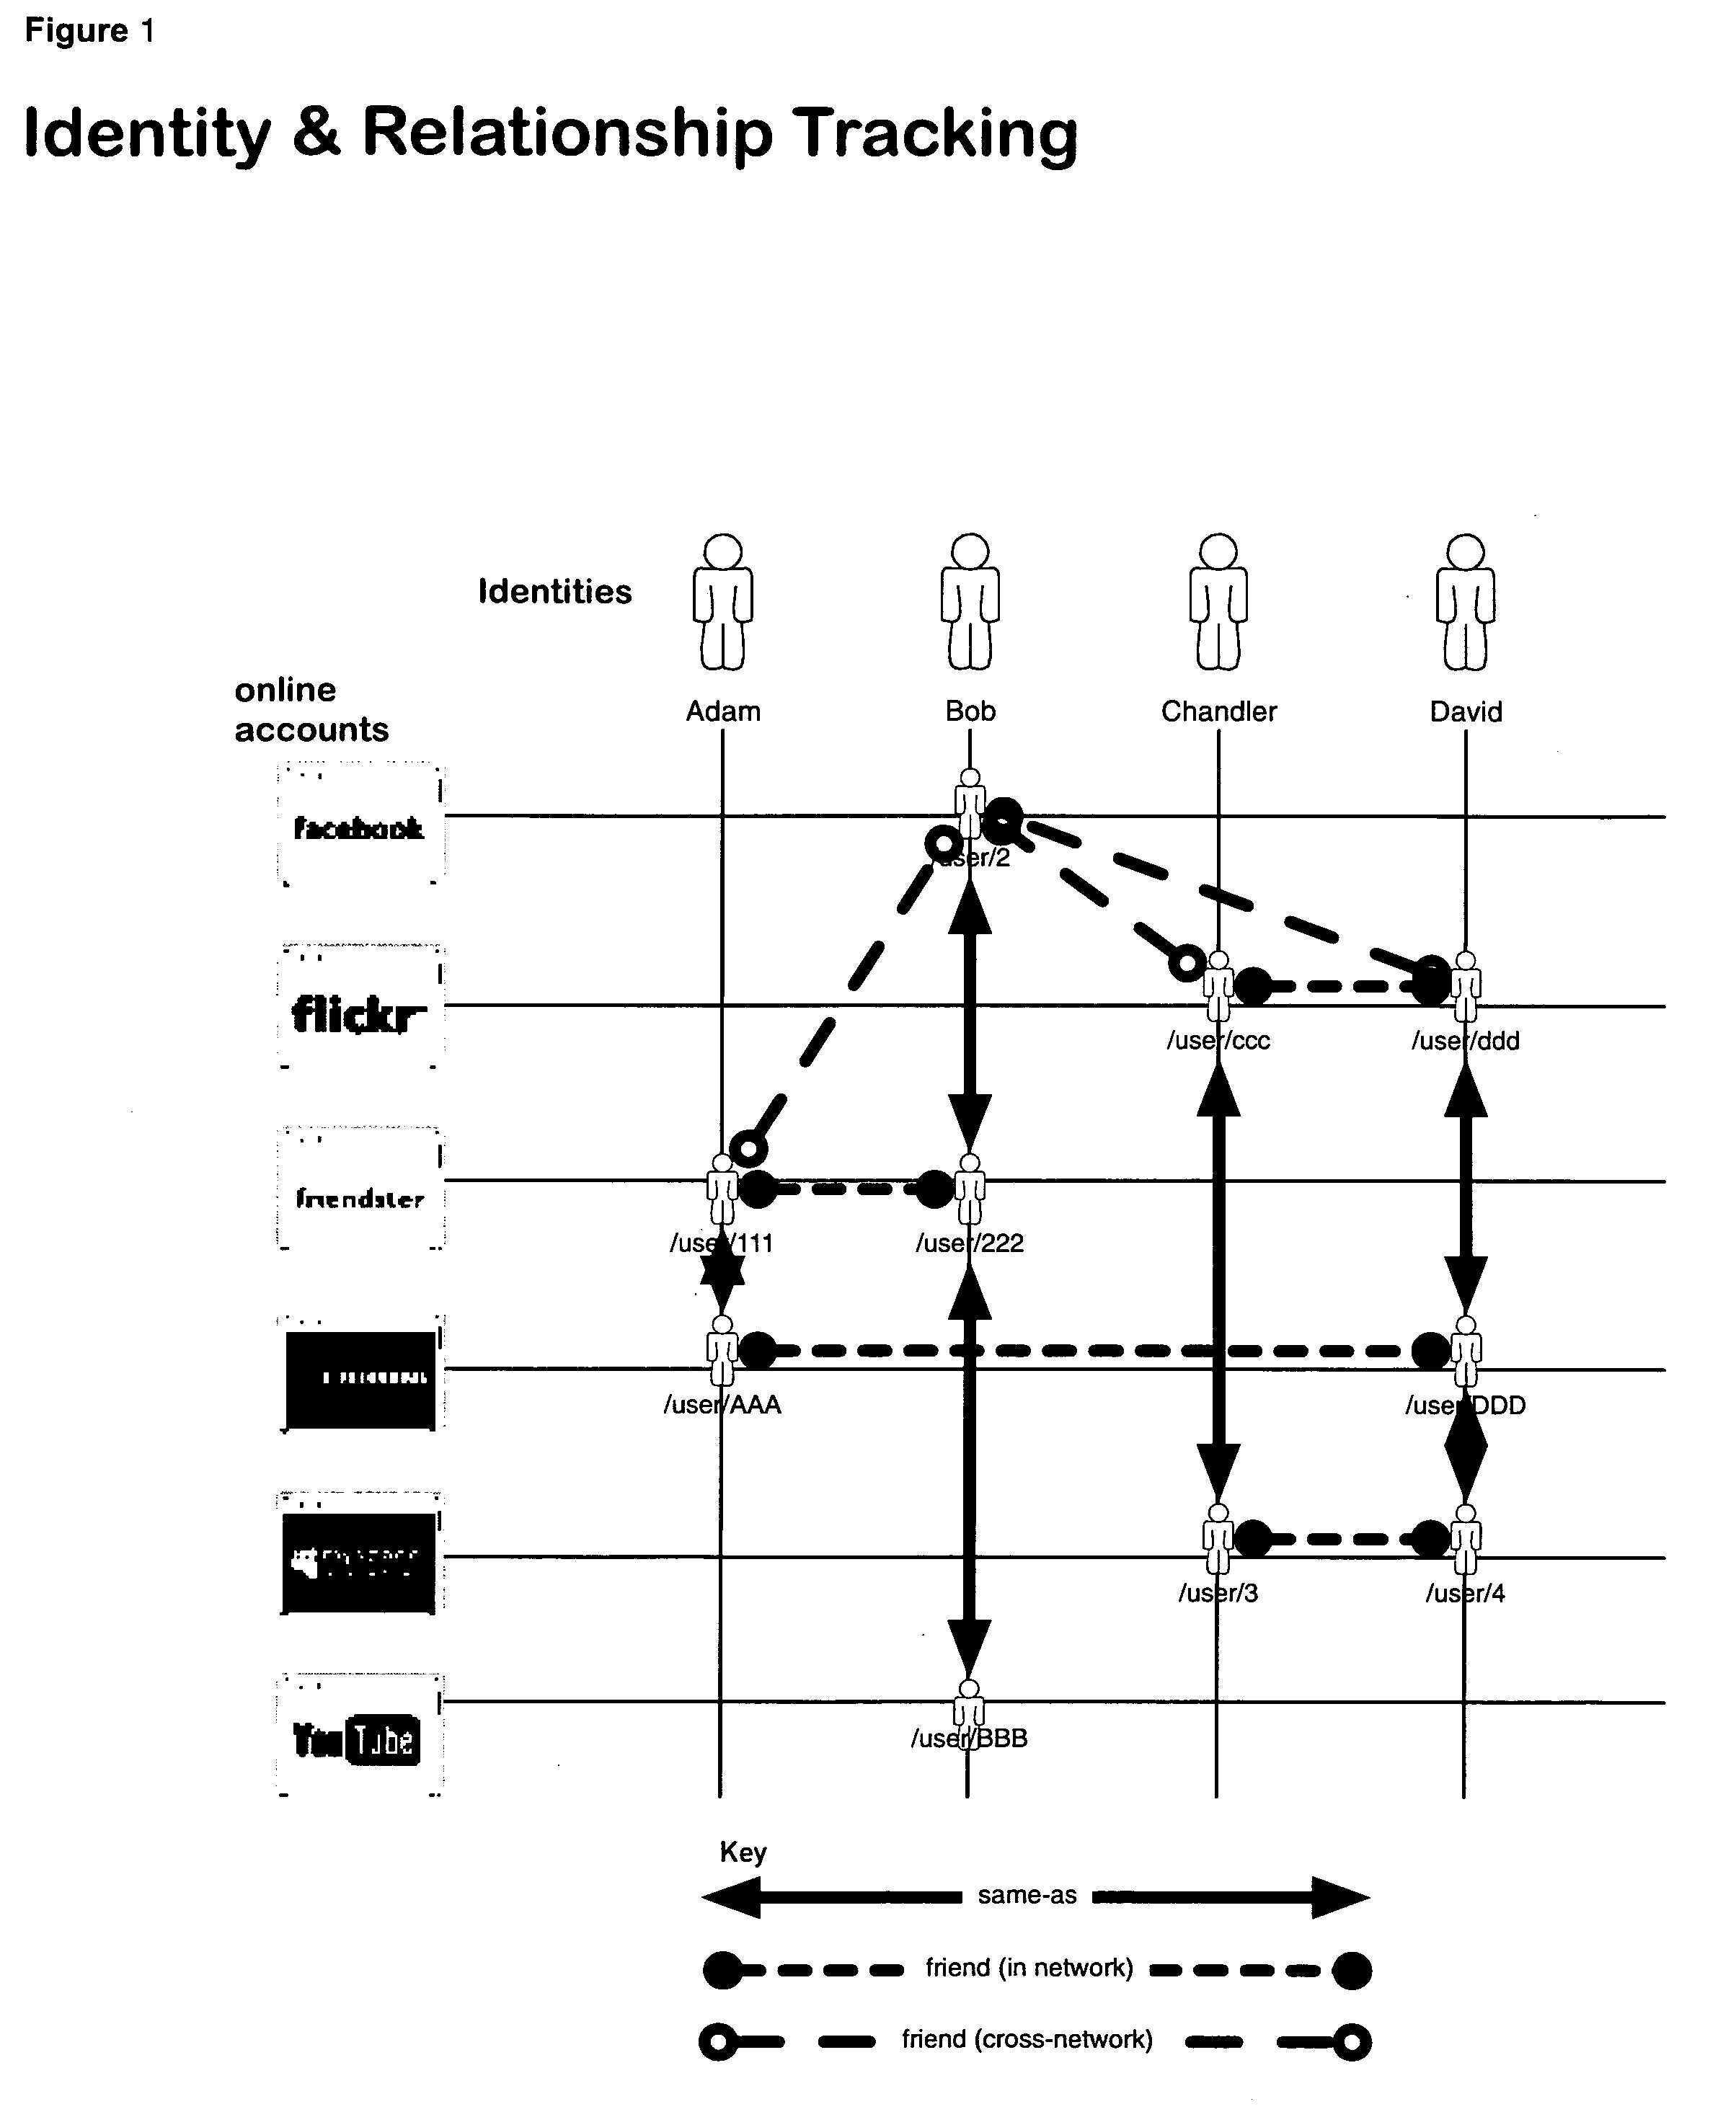 System and method for indexing, correlating, managing, referencing and syndicating identities and relationships across systems